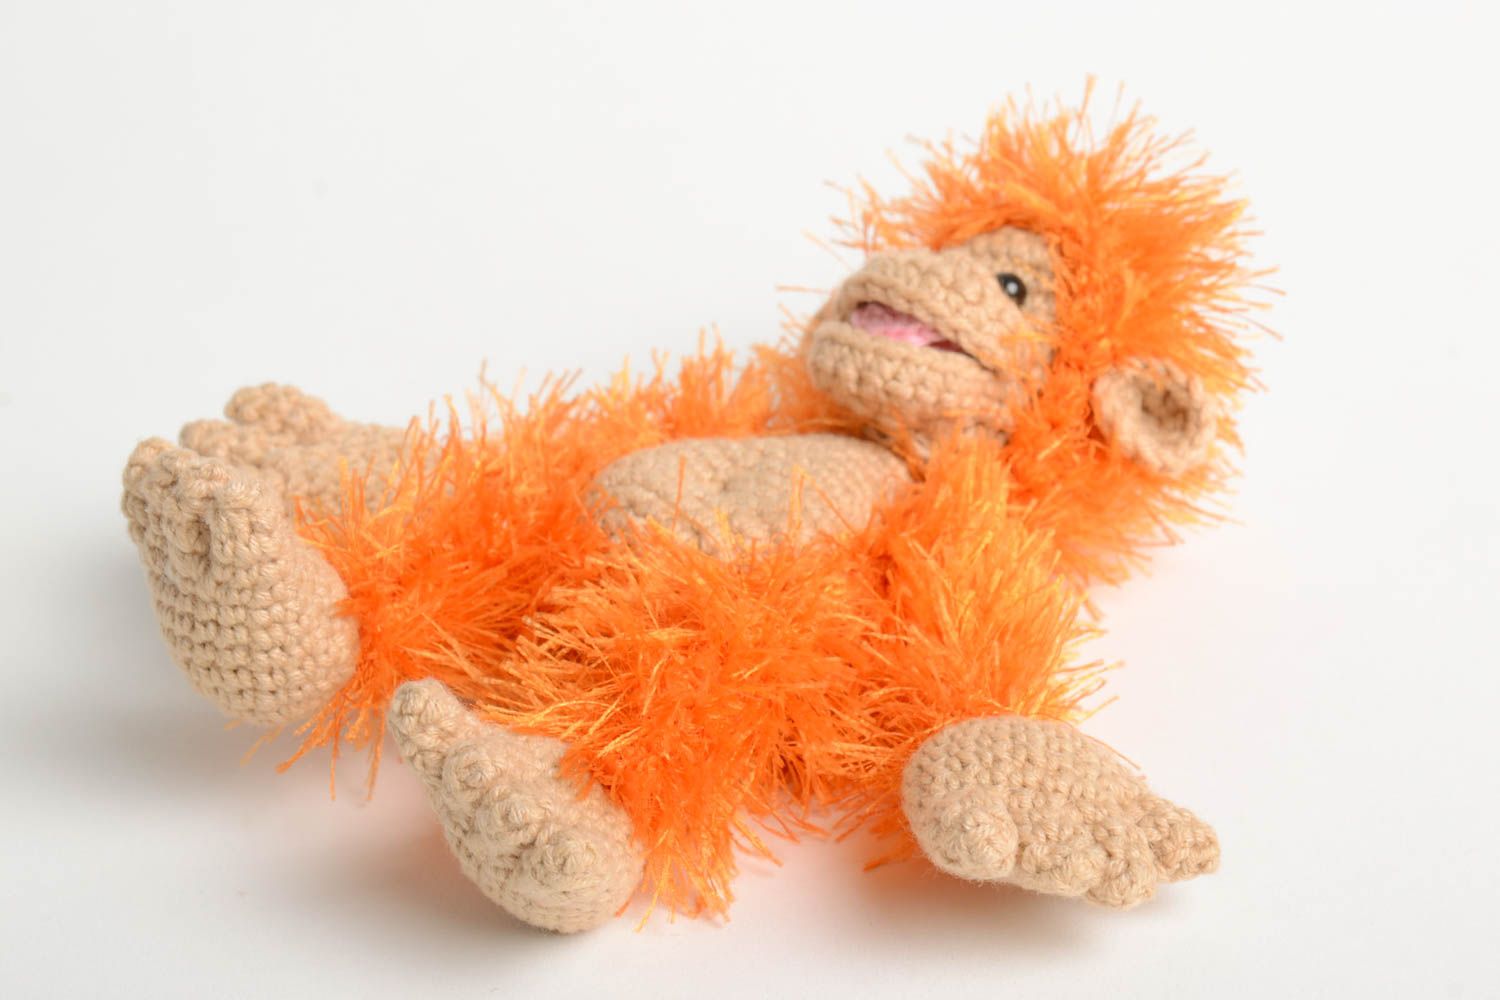 Cute crocheted toy monkey soft toy unusual handmade toy for kids cute toy photo 4